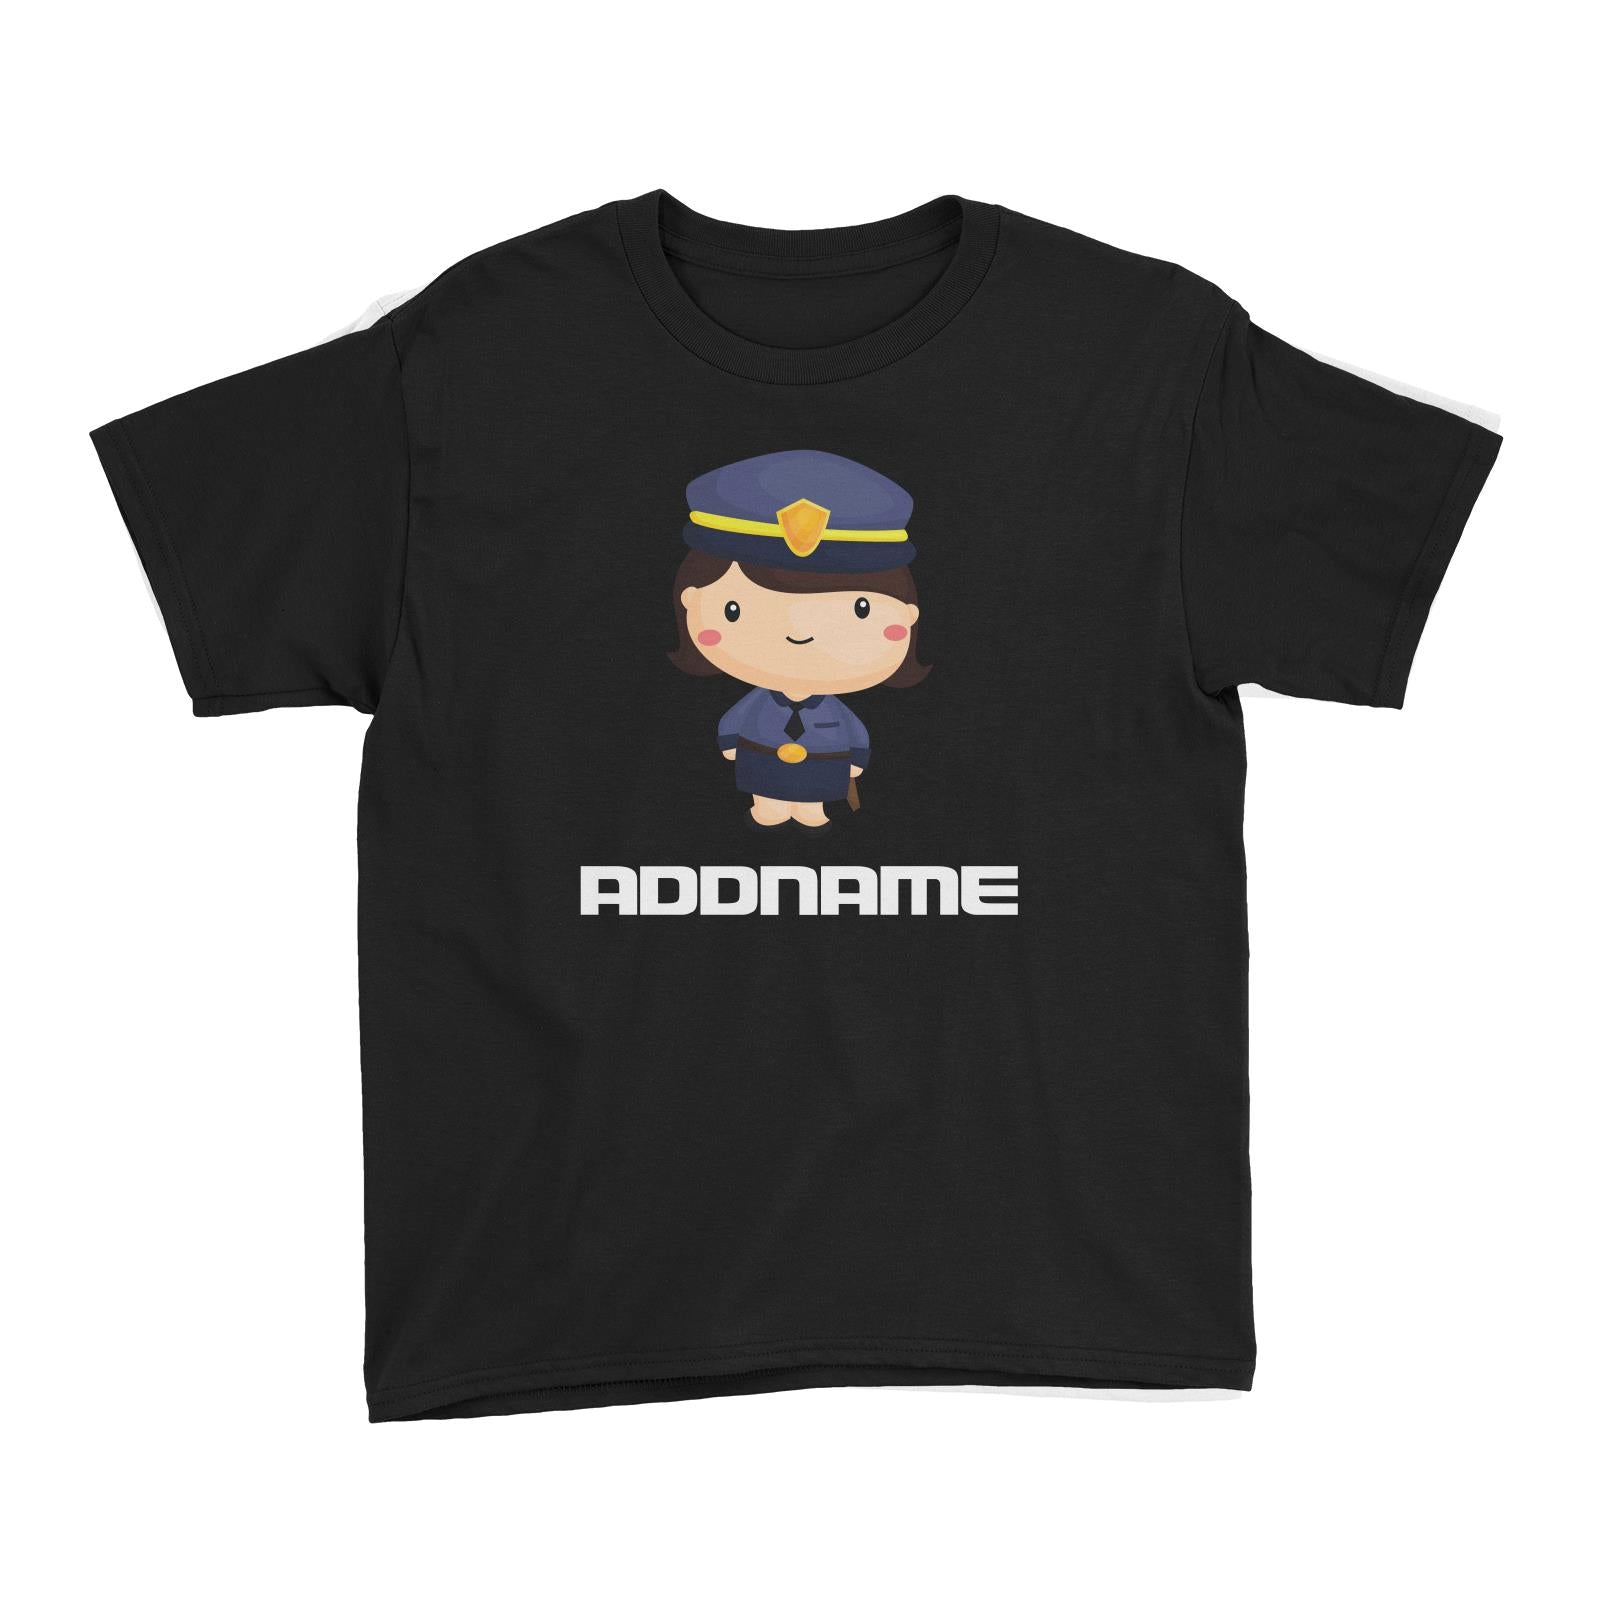 Birthday Police Officer Short Hair Girl  In Suit Addname Kid's T-Shirt